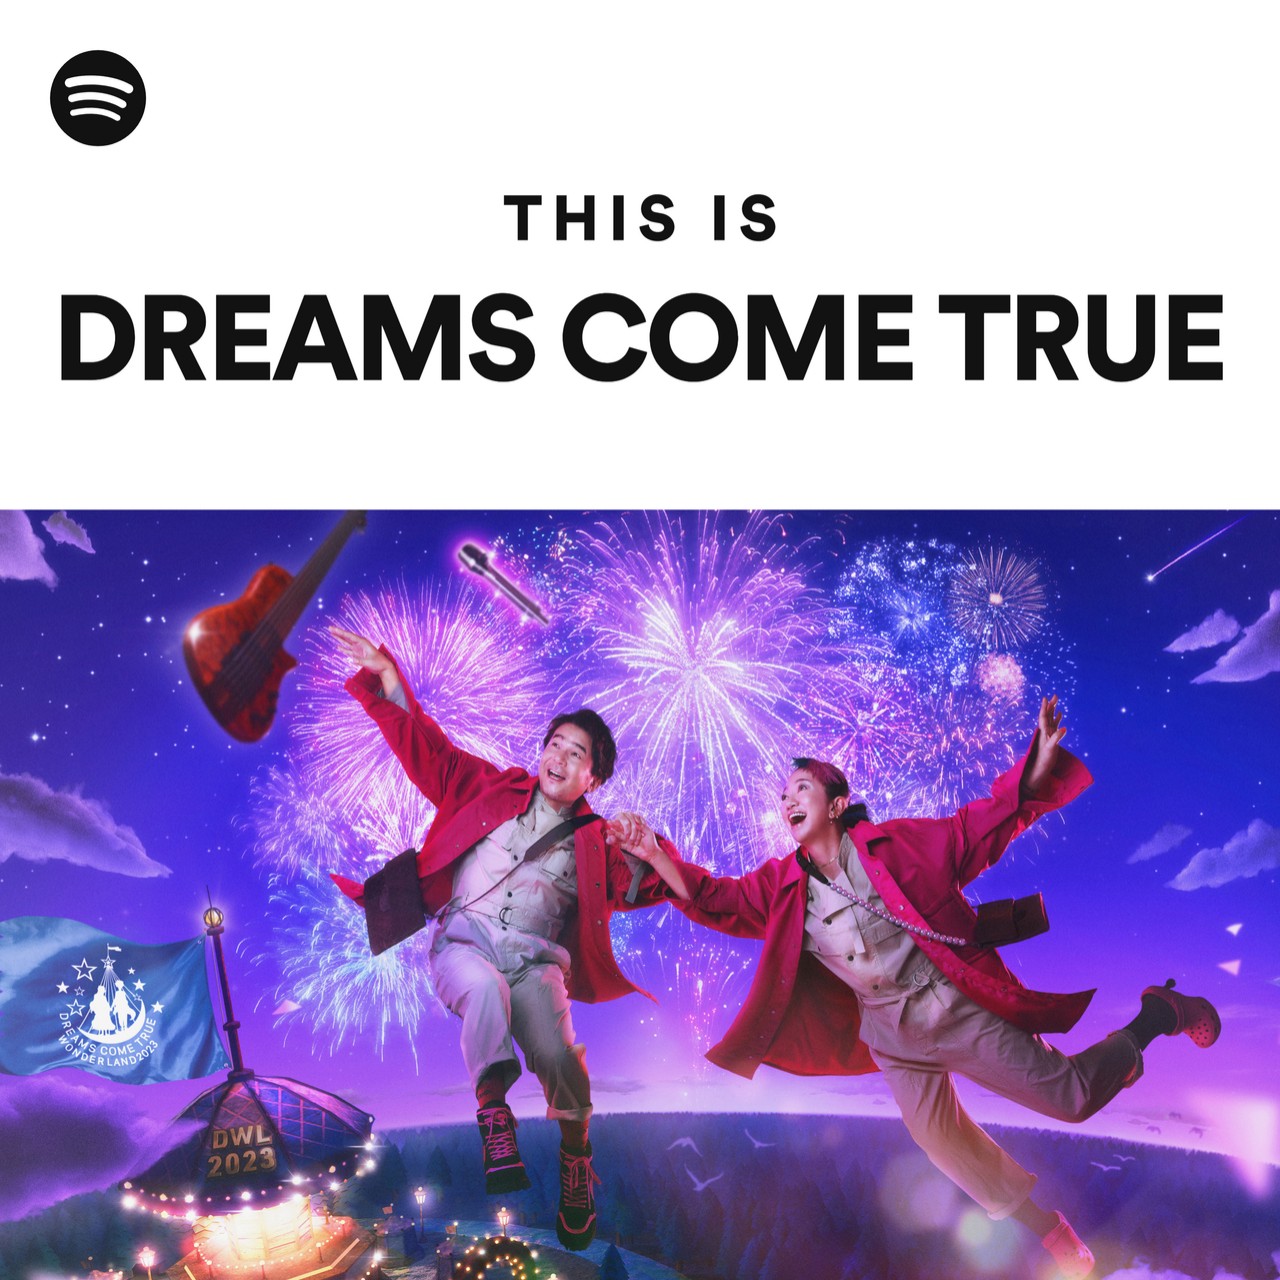 This Is DREAMS COME TRUEのサムネイル